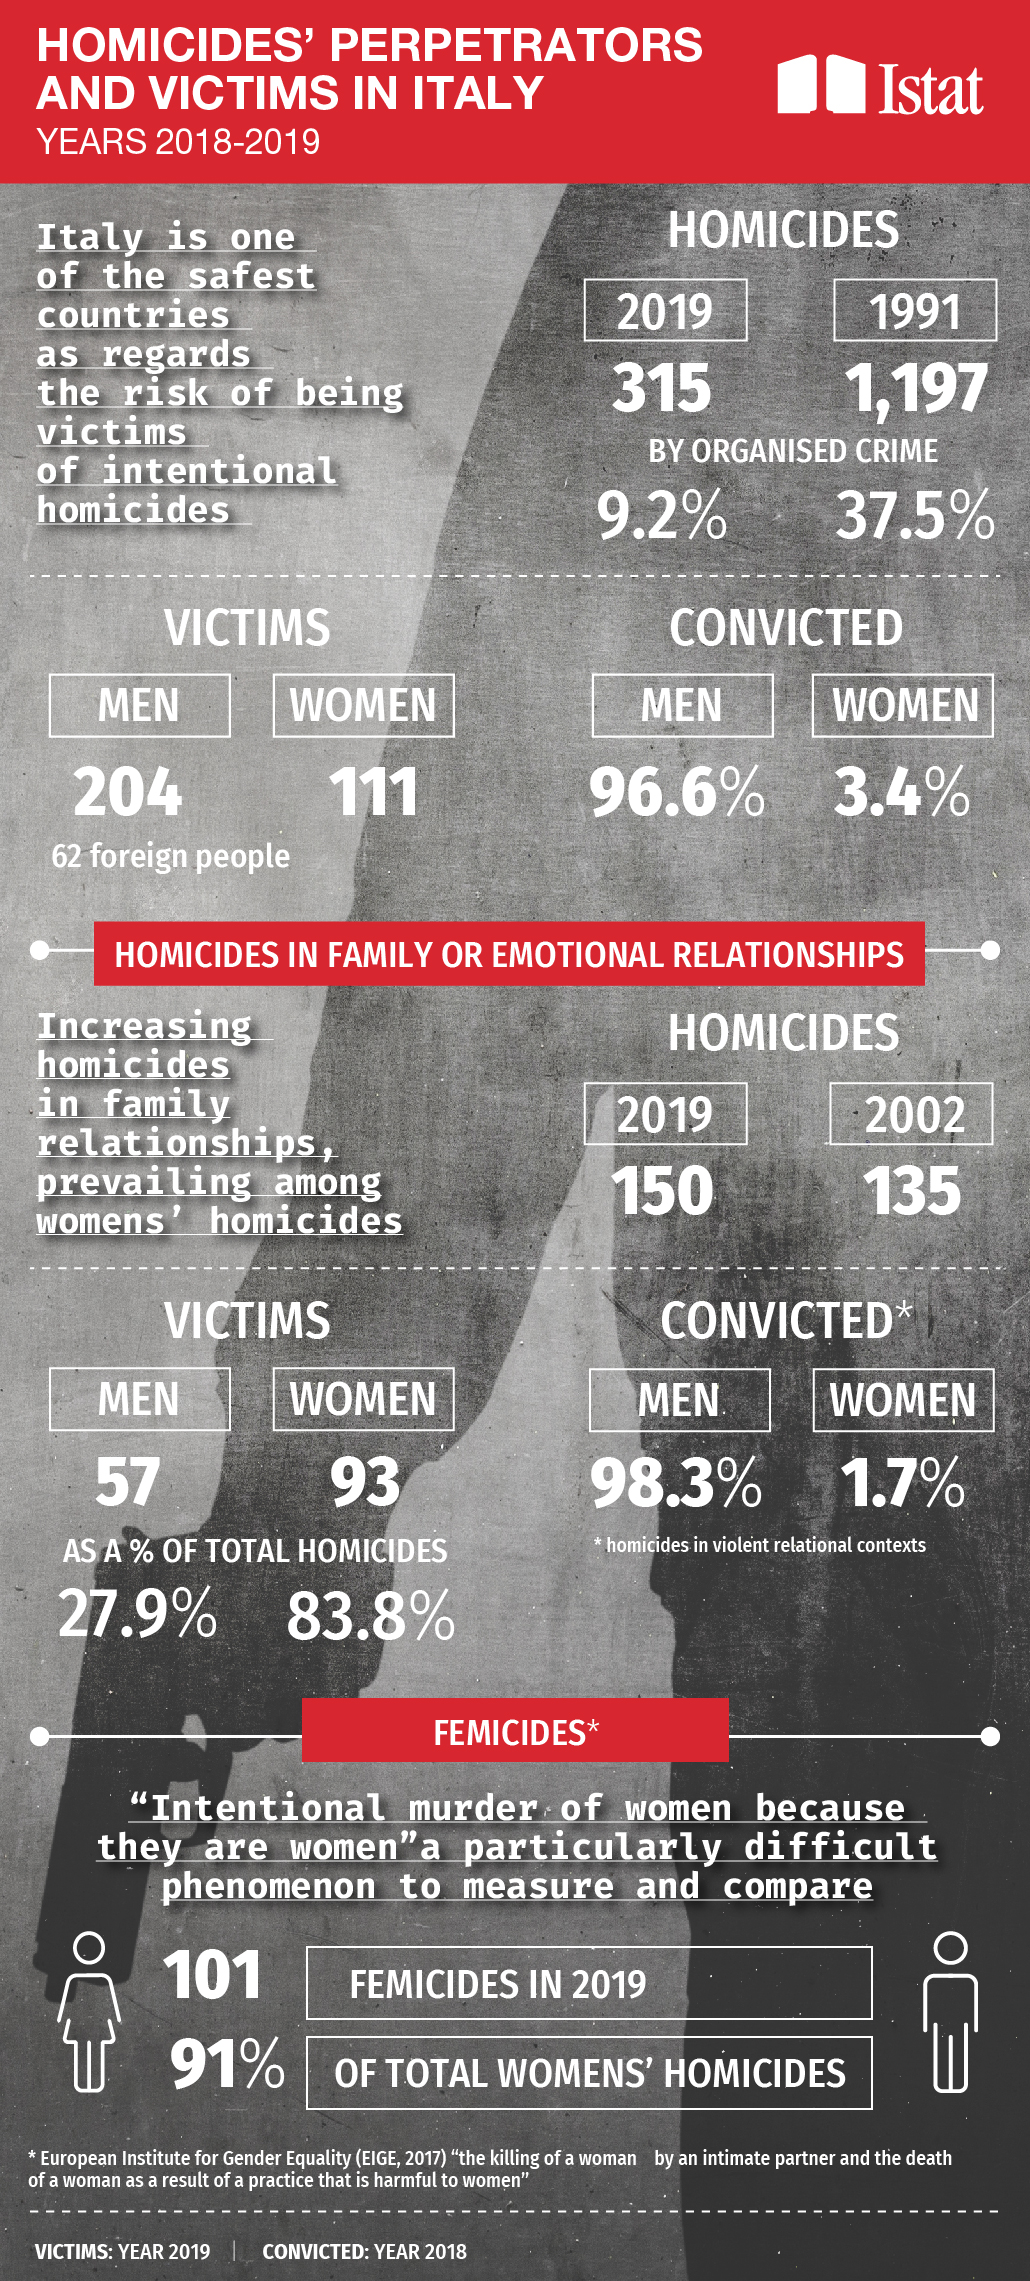 Homicides’ perpetrators and victims in Italy